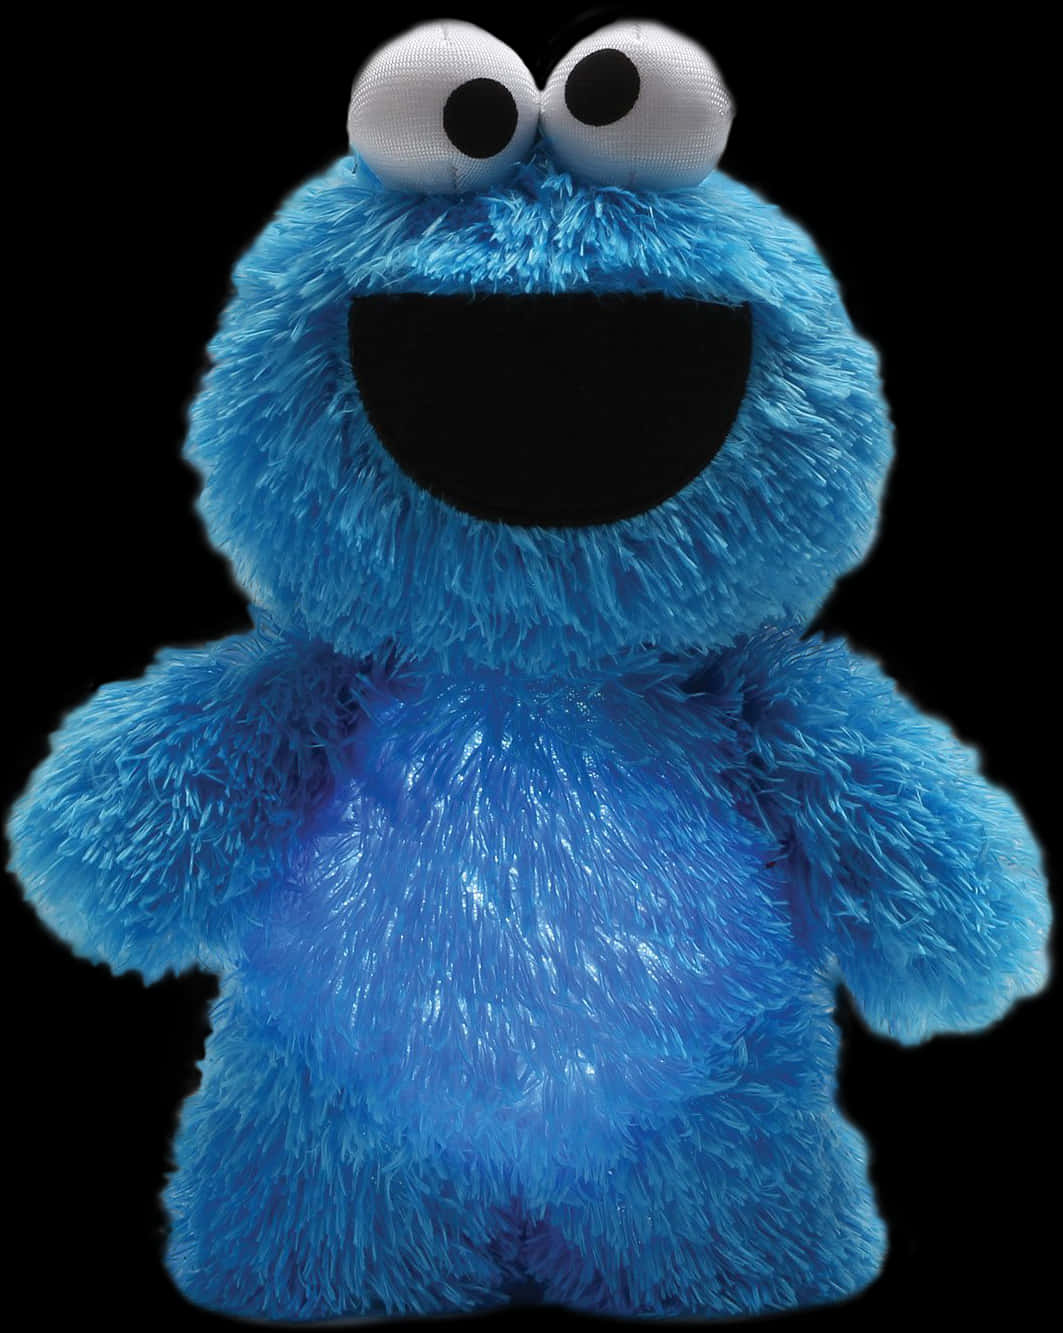 A Blue Stuffed Animal With White Eyes And A Black Background